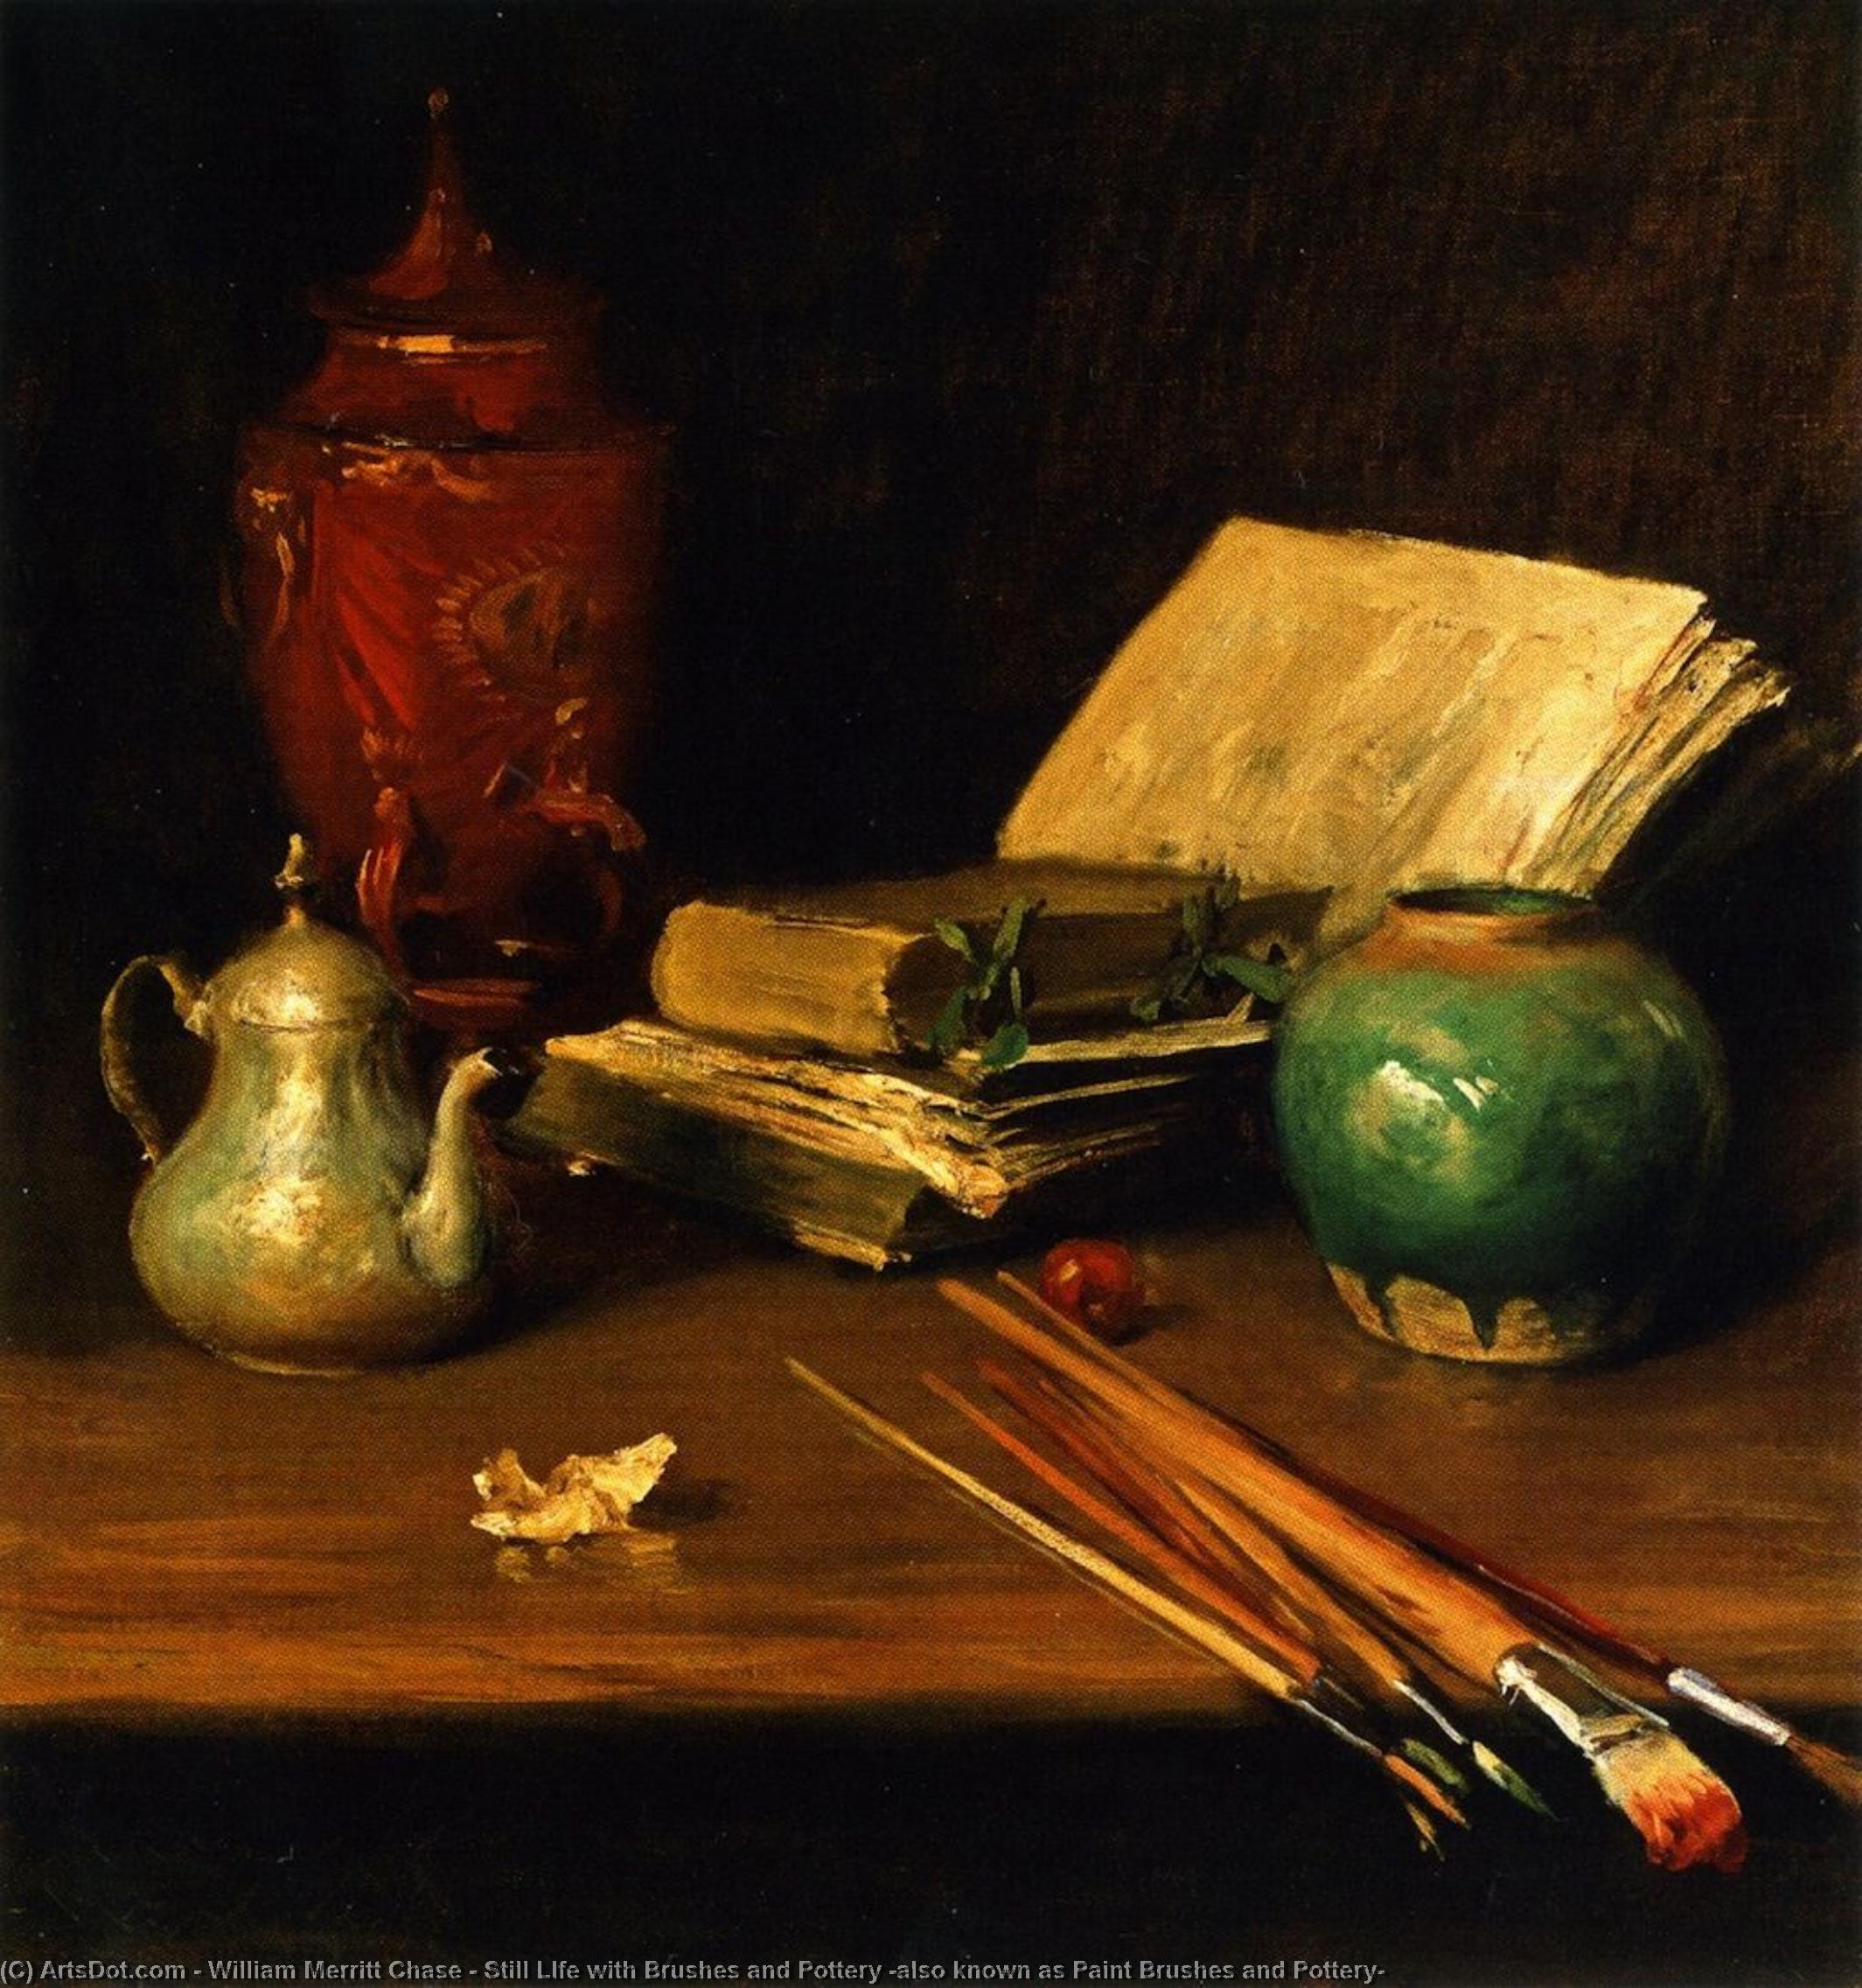 WikiOO.org - Енциклопедія образотворчого мистецтва - Живопис, Картини
 William Merritt Chase - Still LIfe with Brushes and Pottery (also known as Paint Brushes and Pottery)